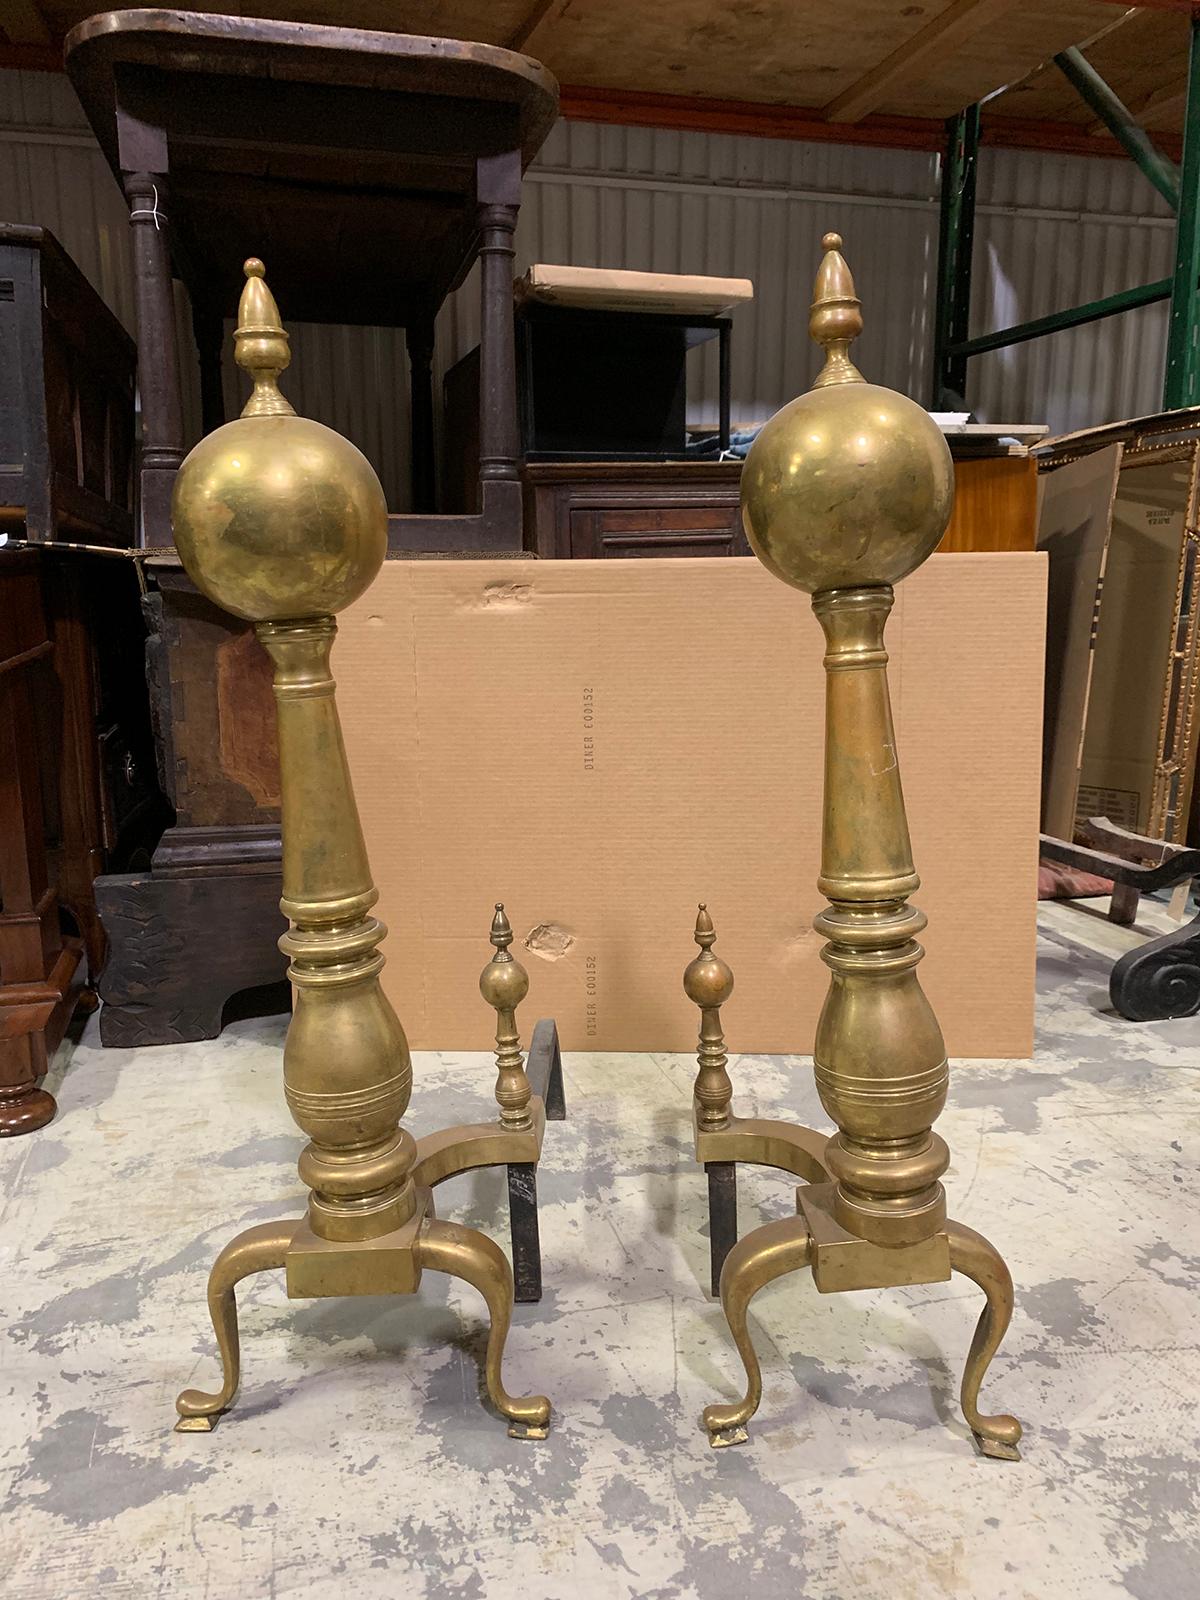 Pair of 19th-20th Century Large Scale American Brass Andirons with Ball Finials For Sale 16